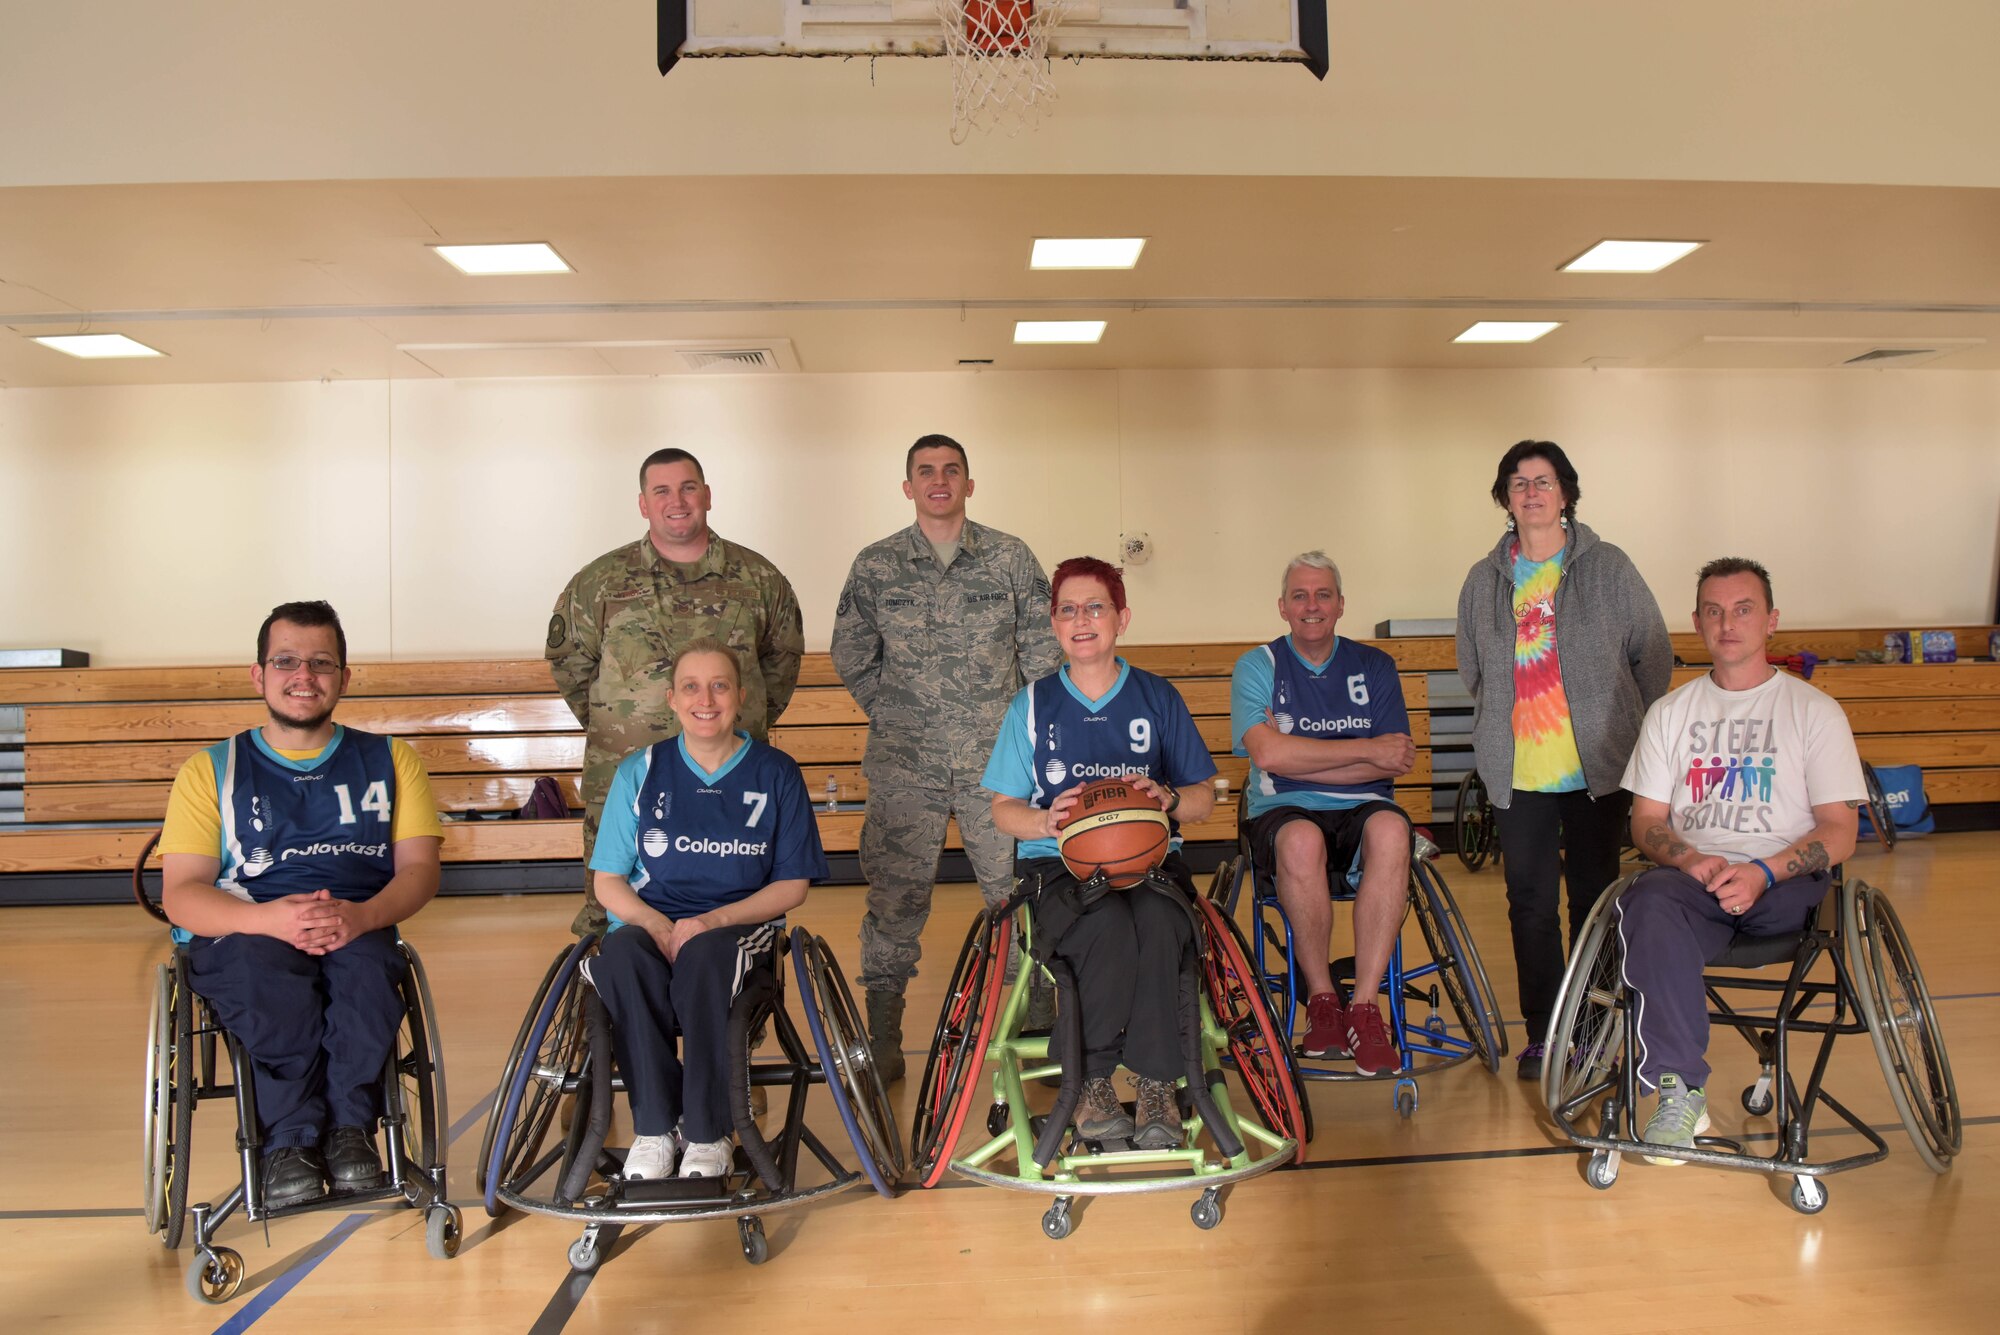 Team Mildenhall Airmen, members of the Hereward Heat wheelchair basketball club, and a volunteer from Steel Bones charity organization pose for a photo at RAF Mildenhall, England, Oct. 30, 2019. October has been designated as National Disability Employment Awareness Month, to educate people about disability employment as well as to recognize the contributions of employees with disabilities. (U.S. Air Force photo by Senior Airman Benjamin Cooper)